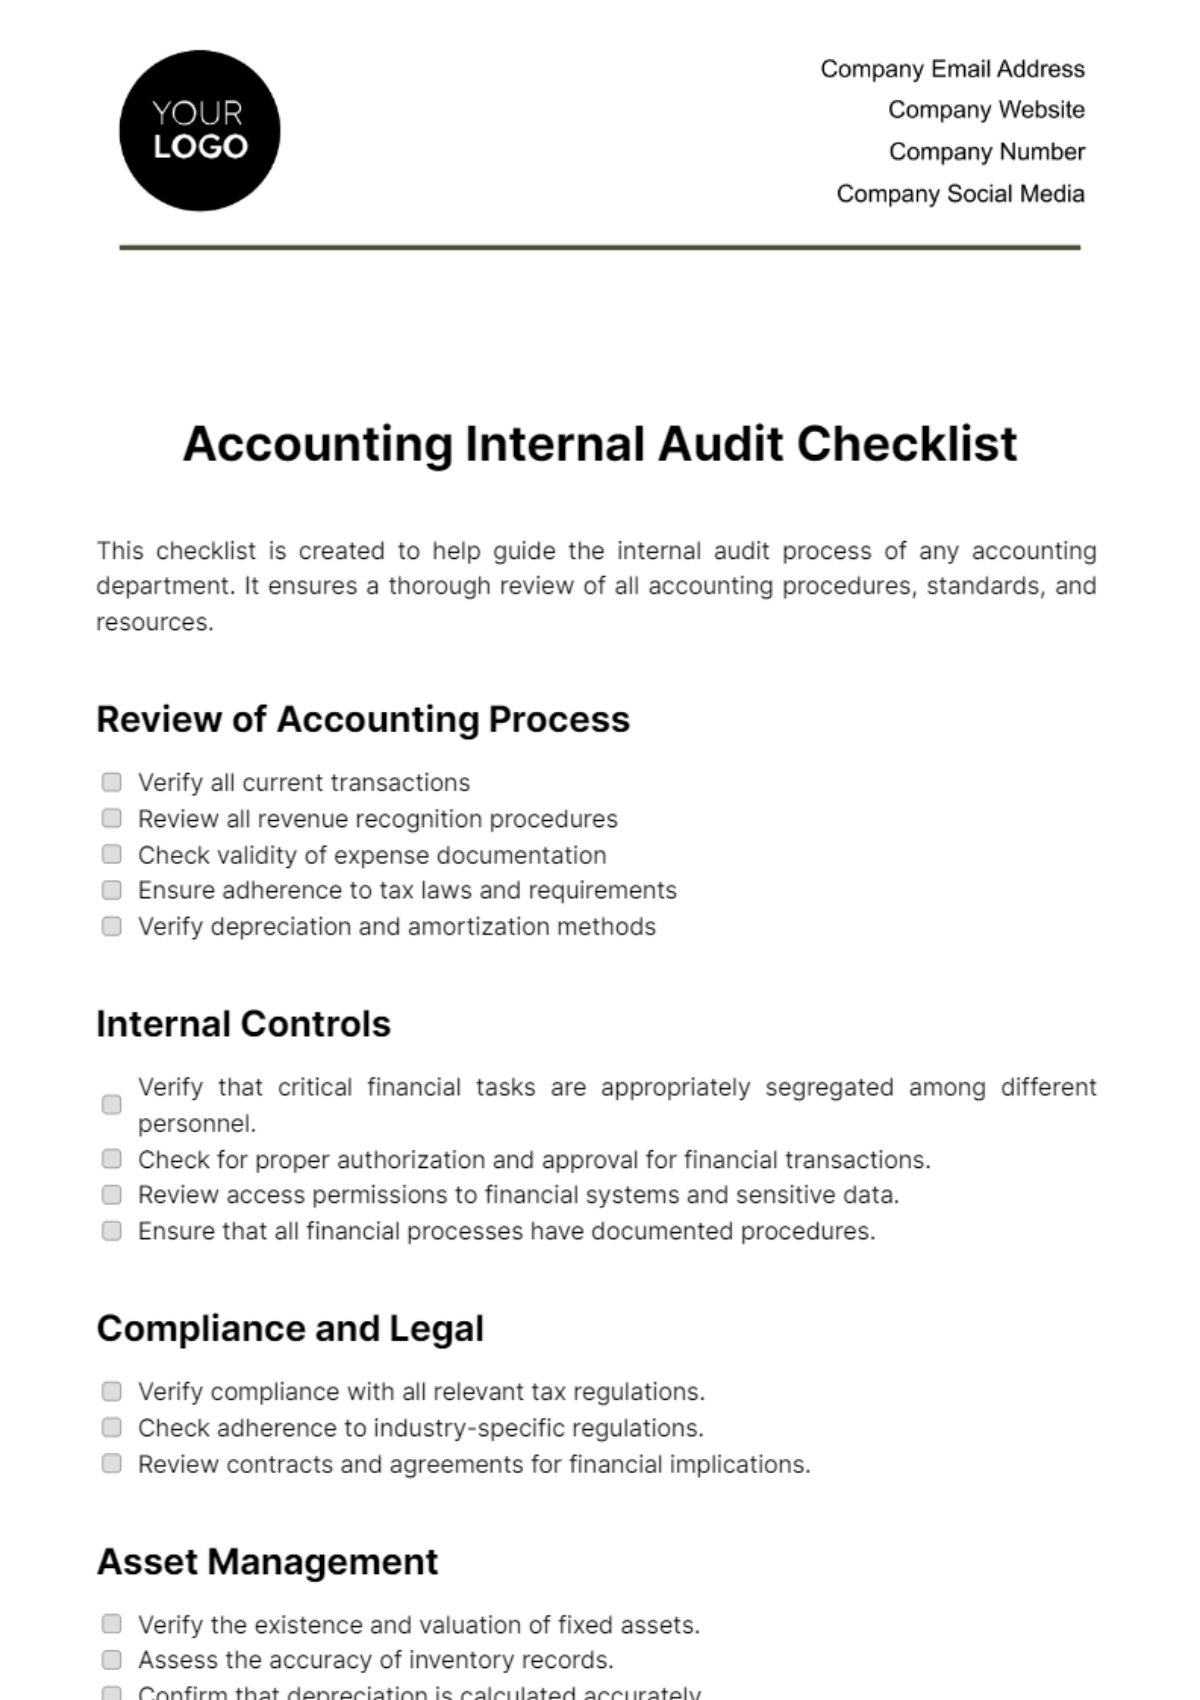 Free Accounting Internal Audit Checklist Template